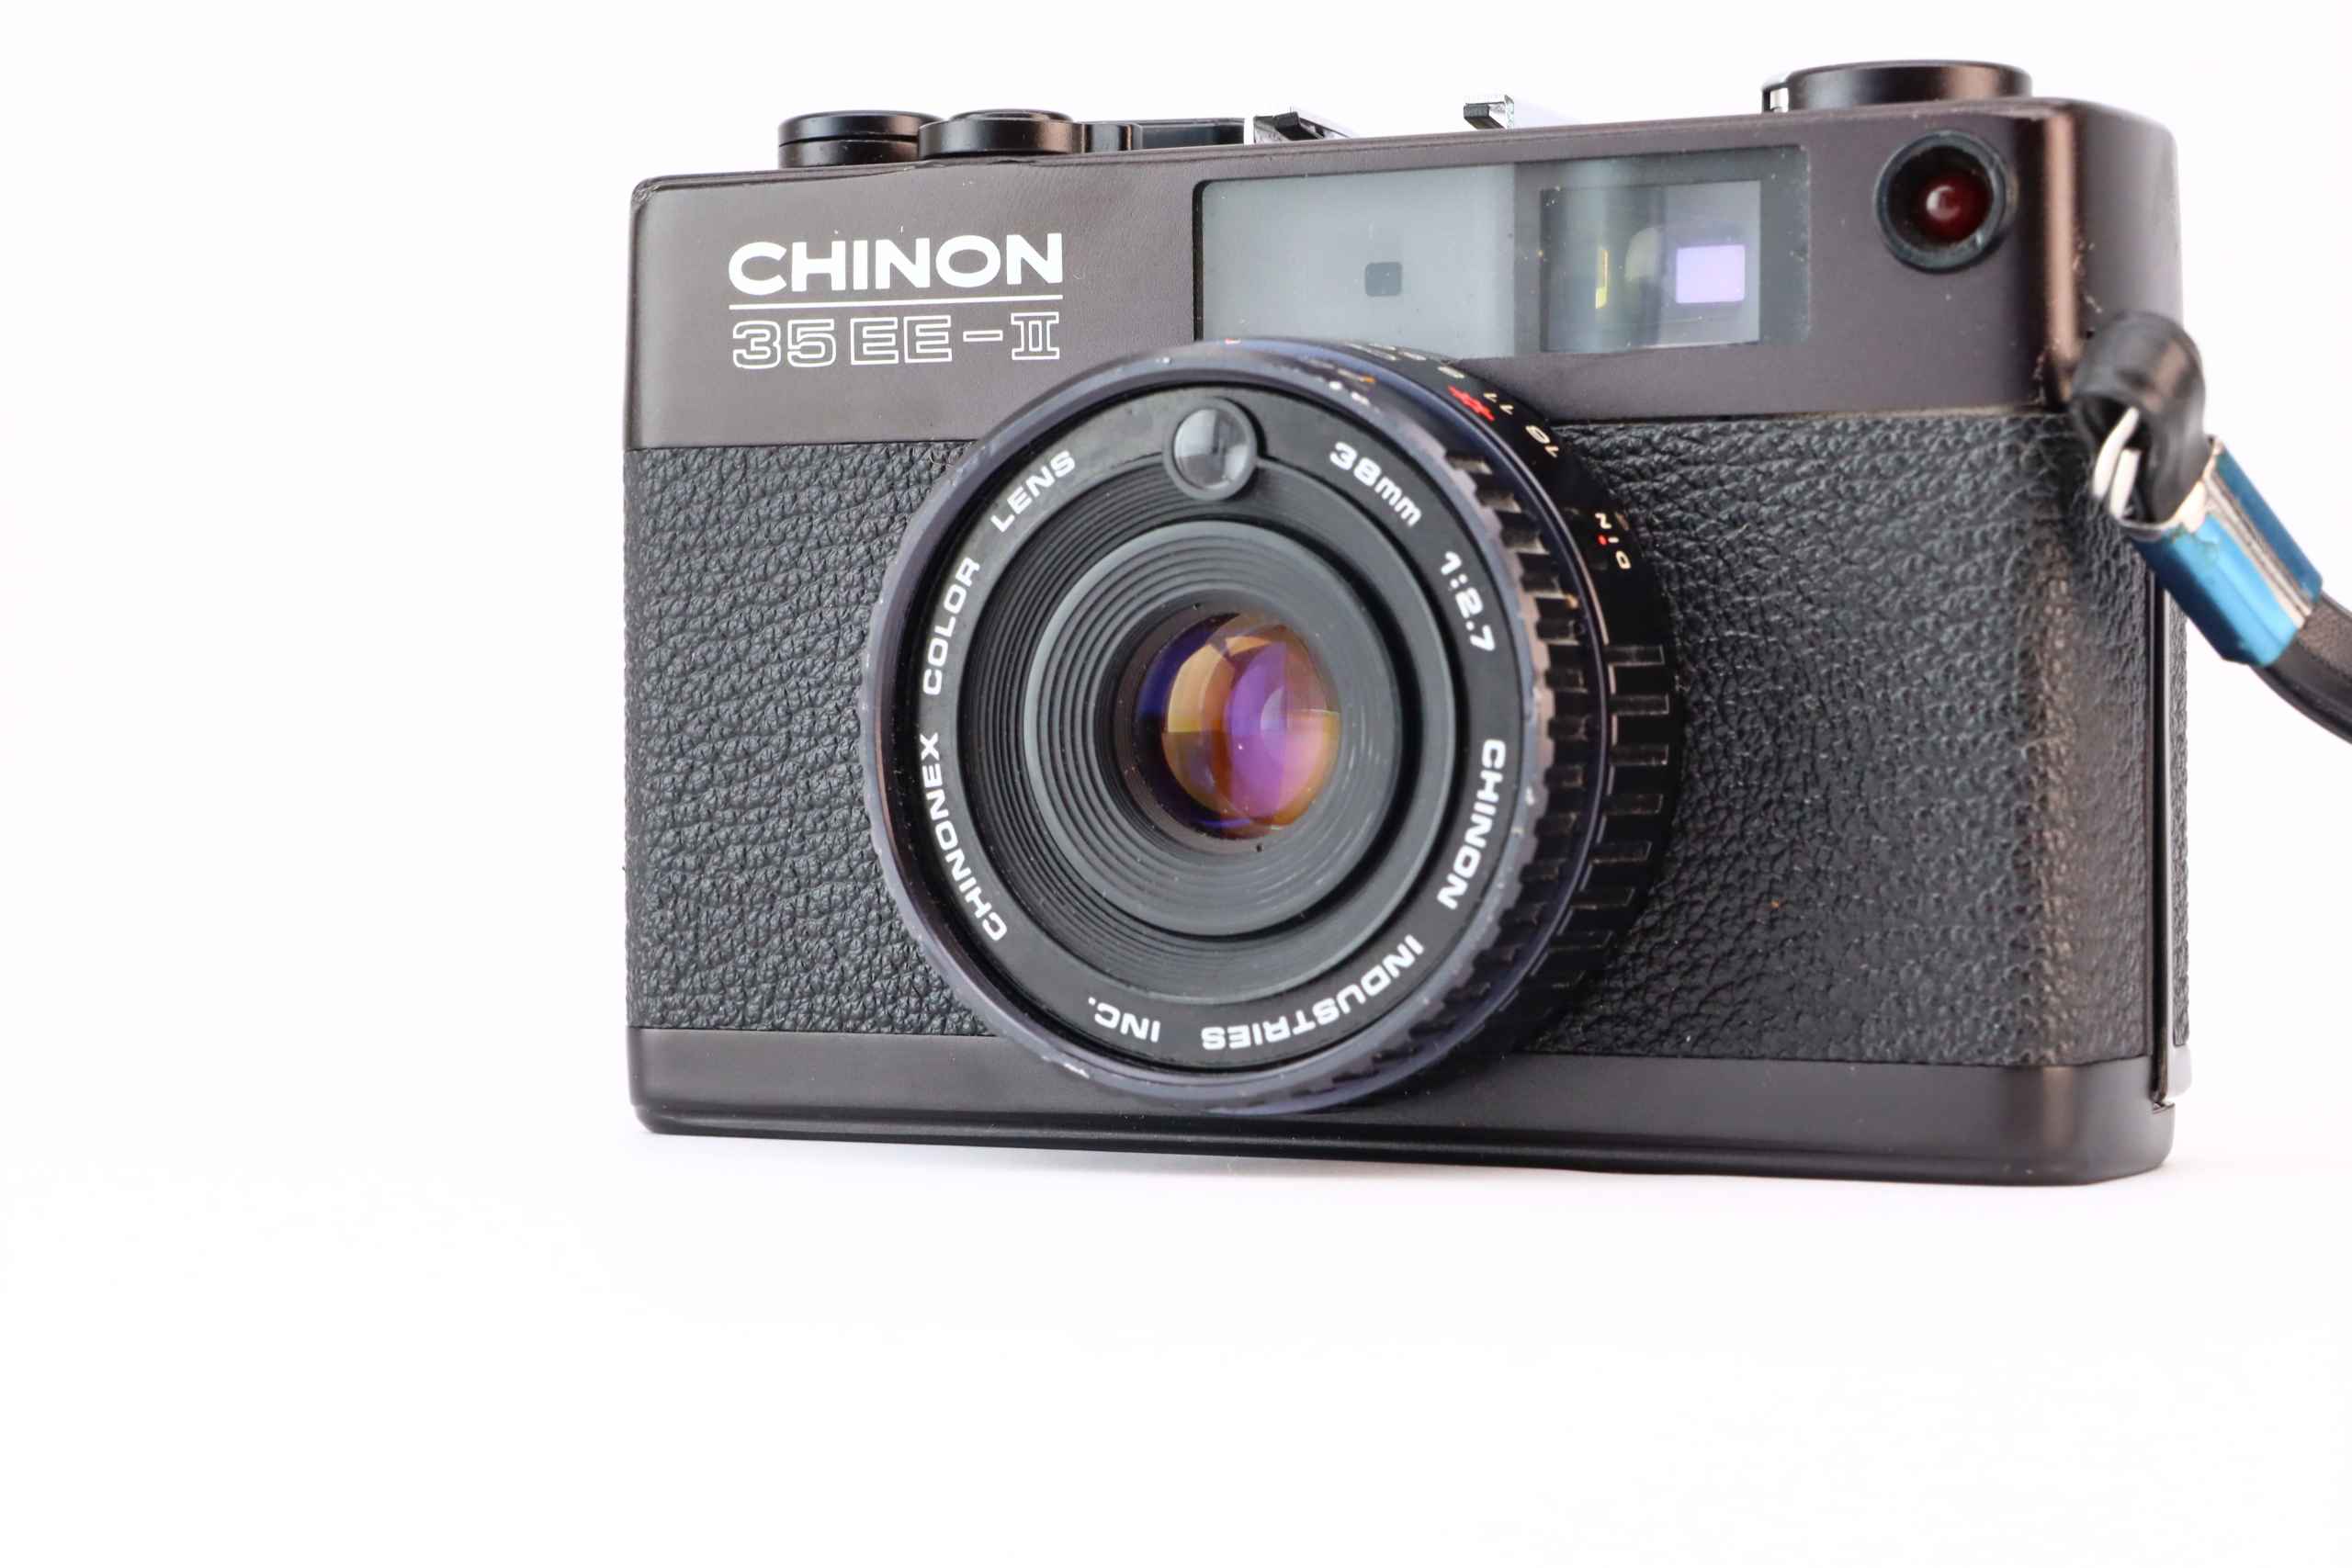 Chinon 35EE-II met Chinonex lens 38mm 1:2.7 – Hard to Find